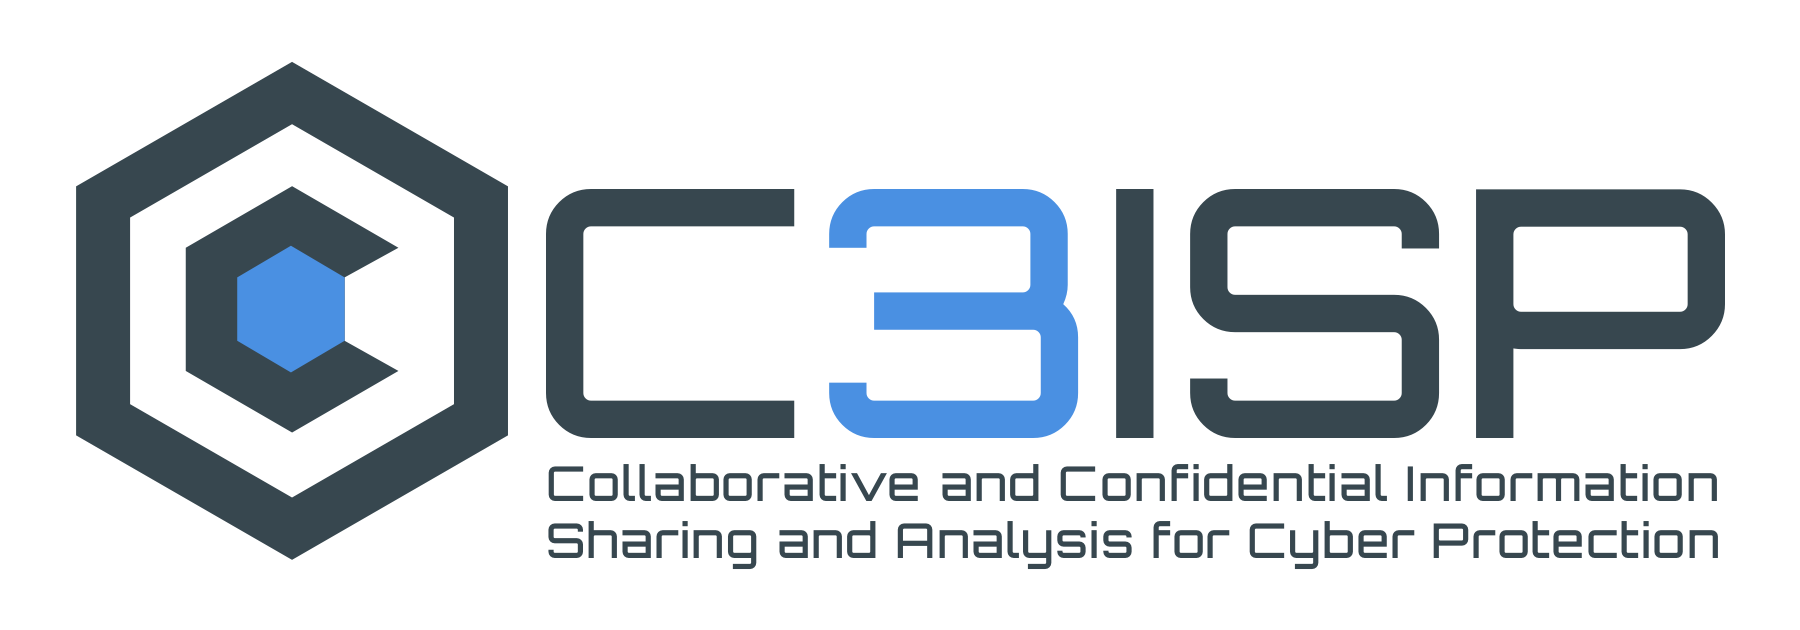 C3ISP: Collaborative & Confidential Information Sharing and Analysis for Cyber Protection